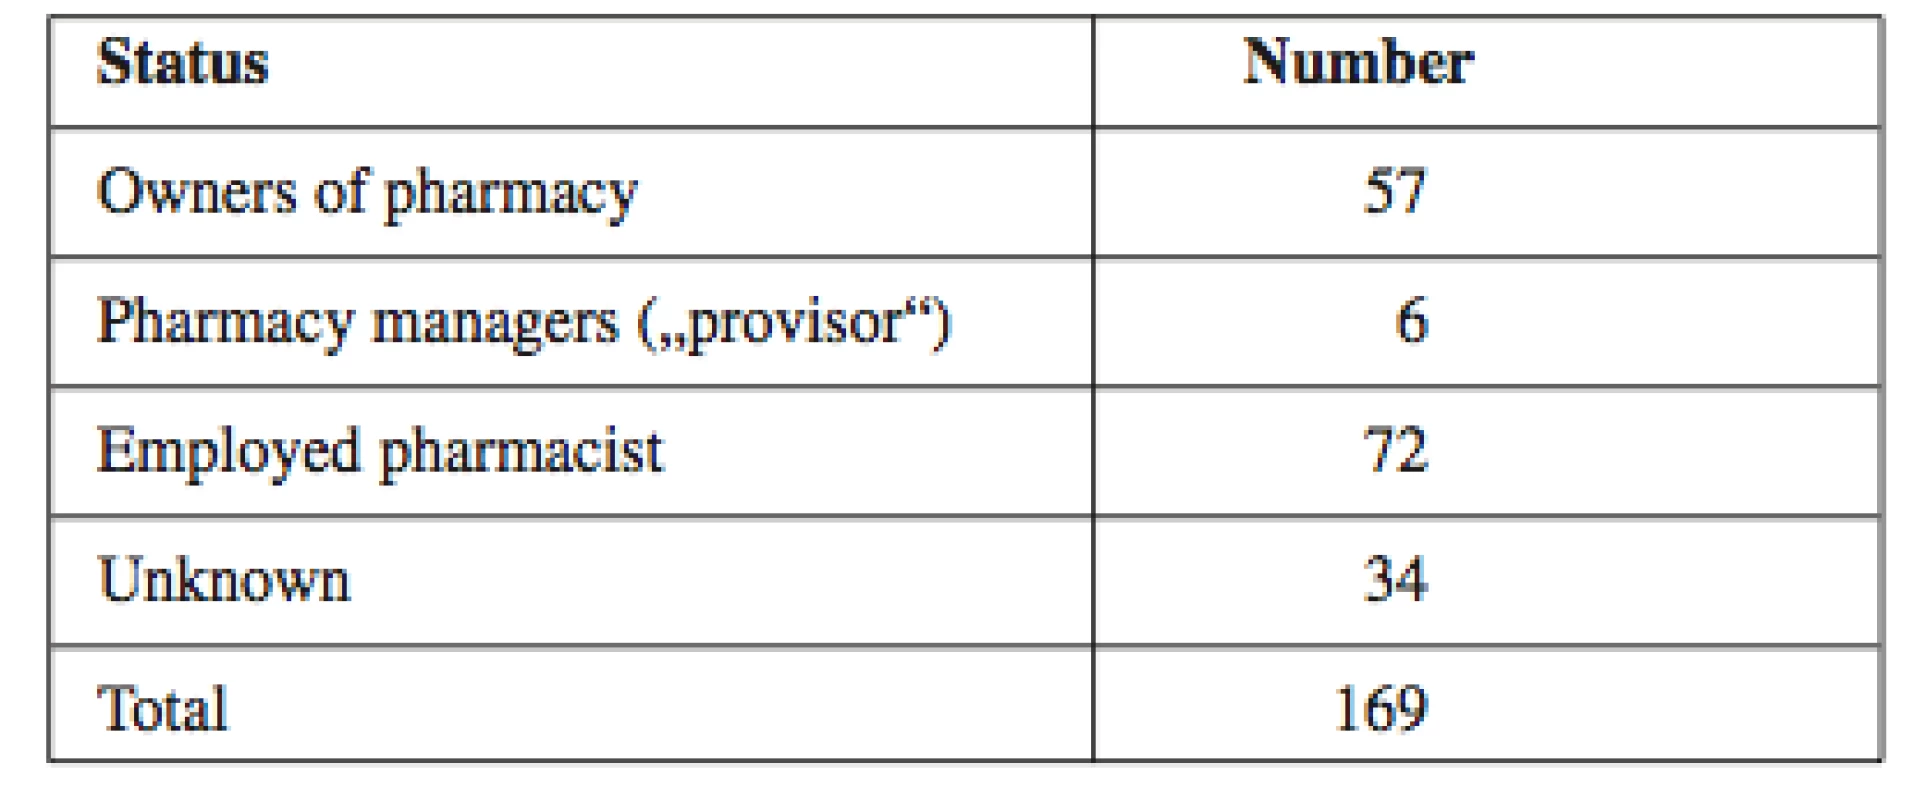 Pharmacists according to the status in employment